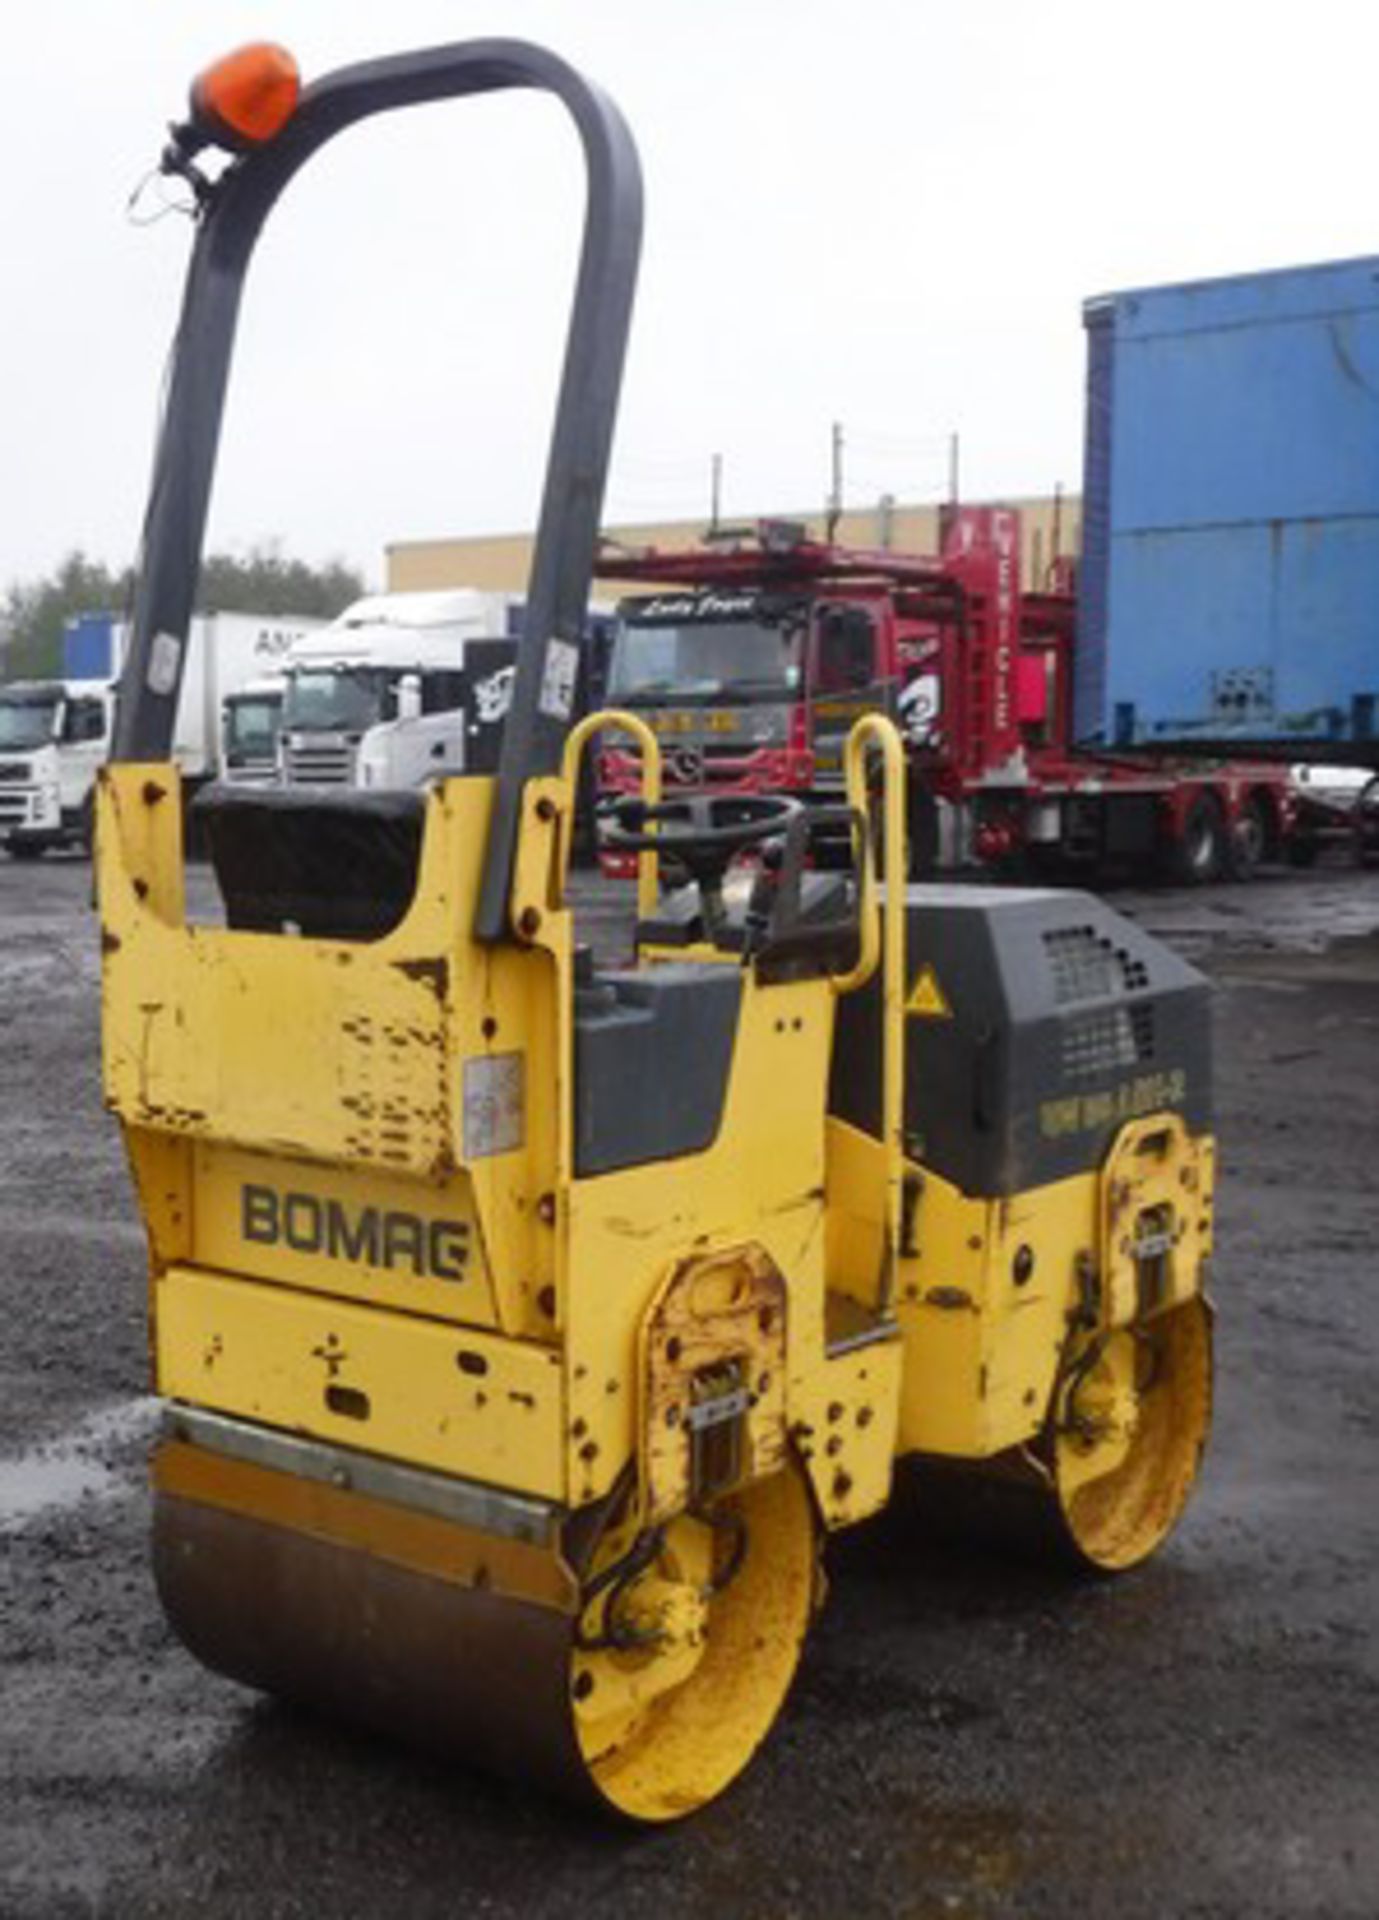 BOMAG BW80 ADH-2 roller. S/N 101460426169. 585hrs (not verified) - Image 8 of 12